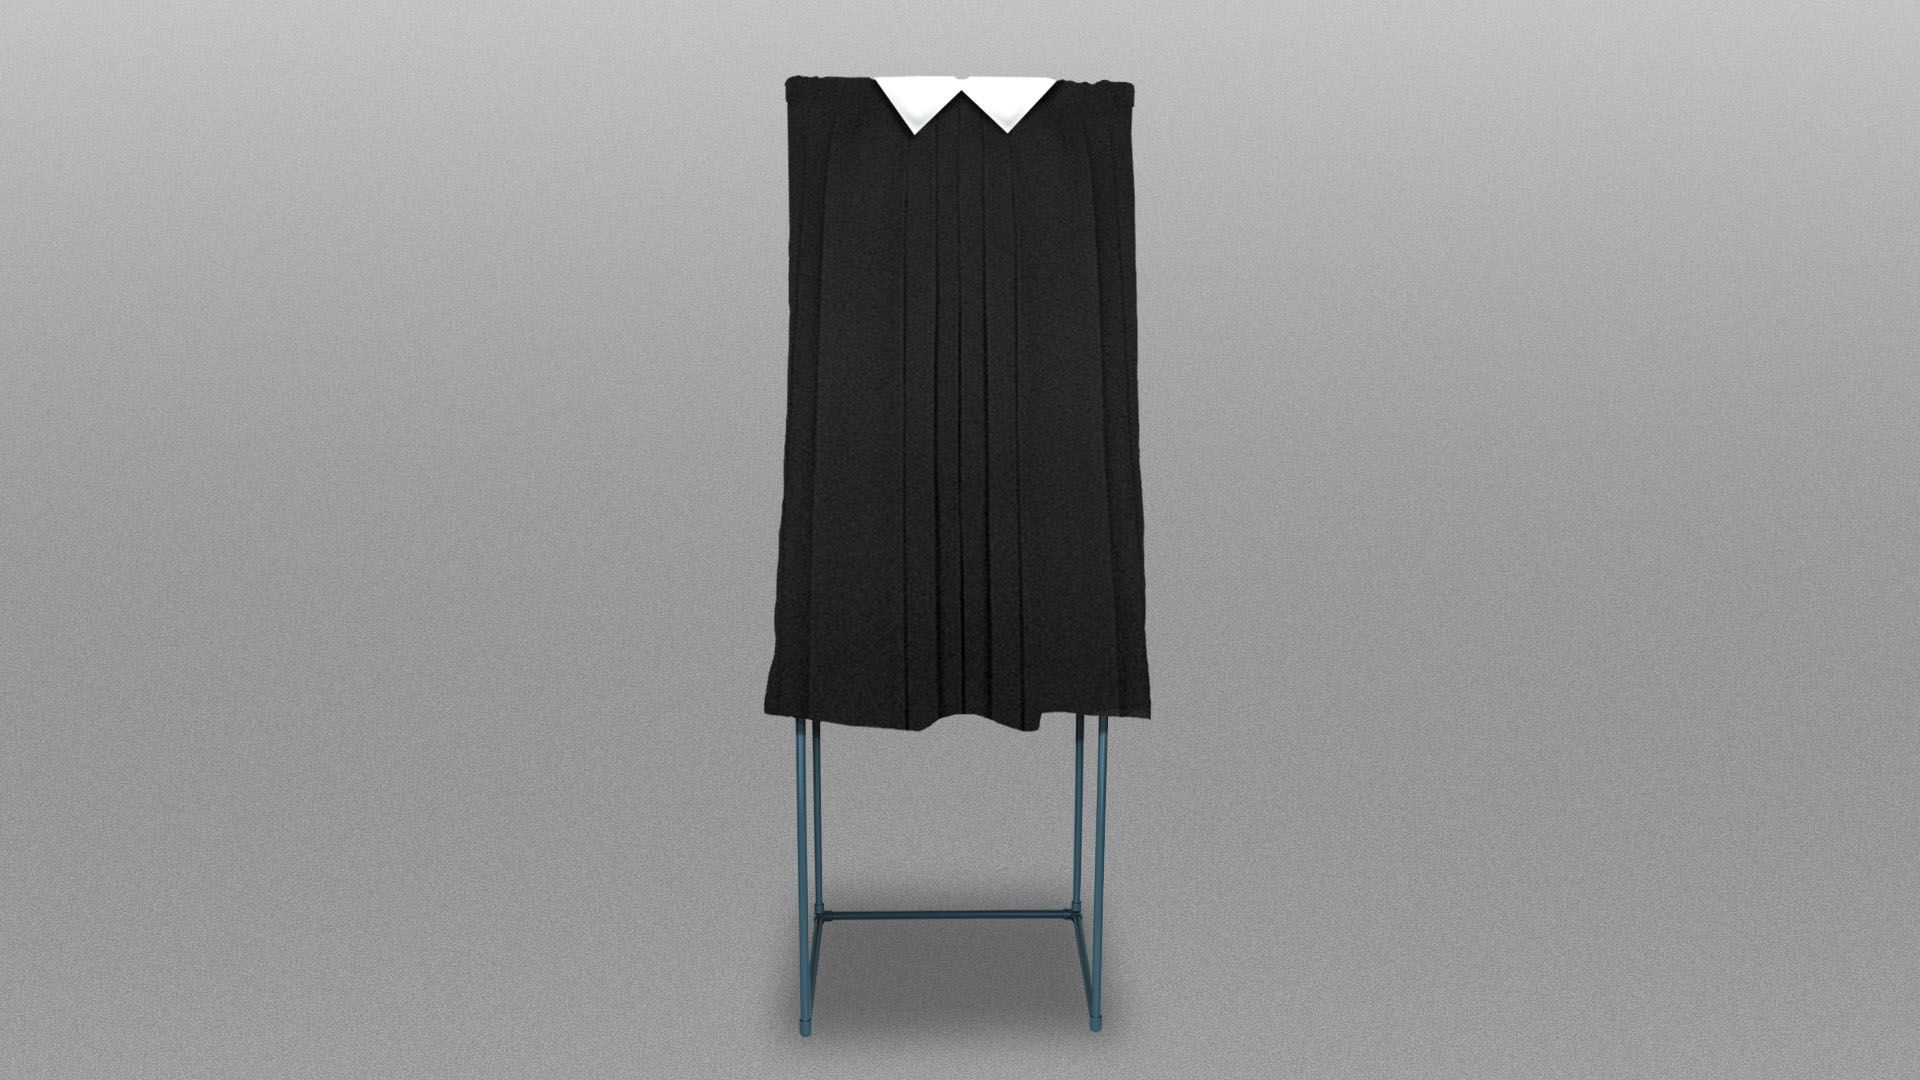 Illustration of a voting booth with a curtain shaped like a judge's robes